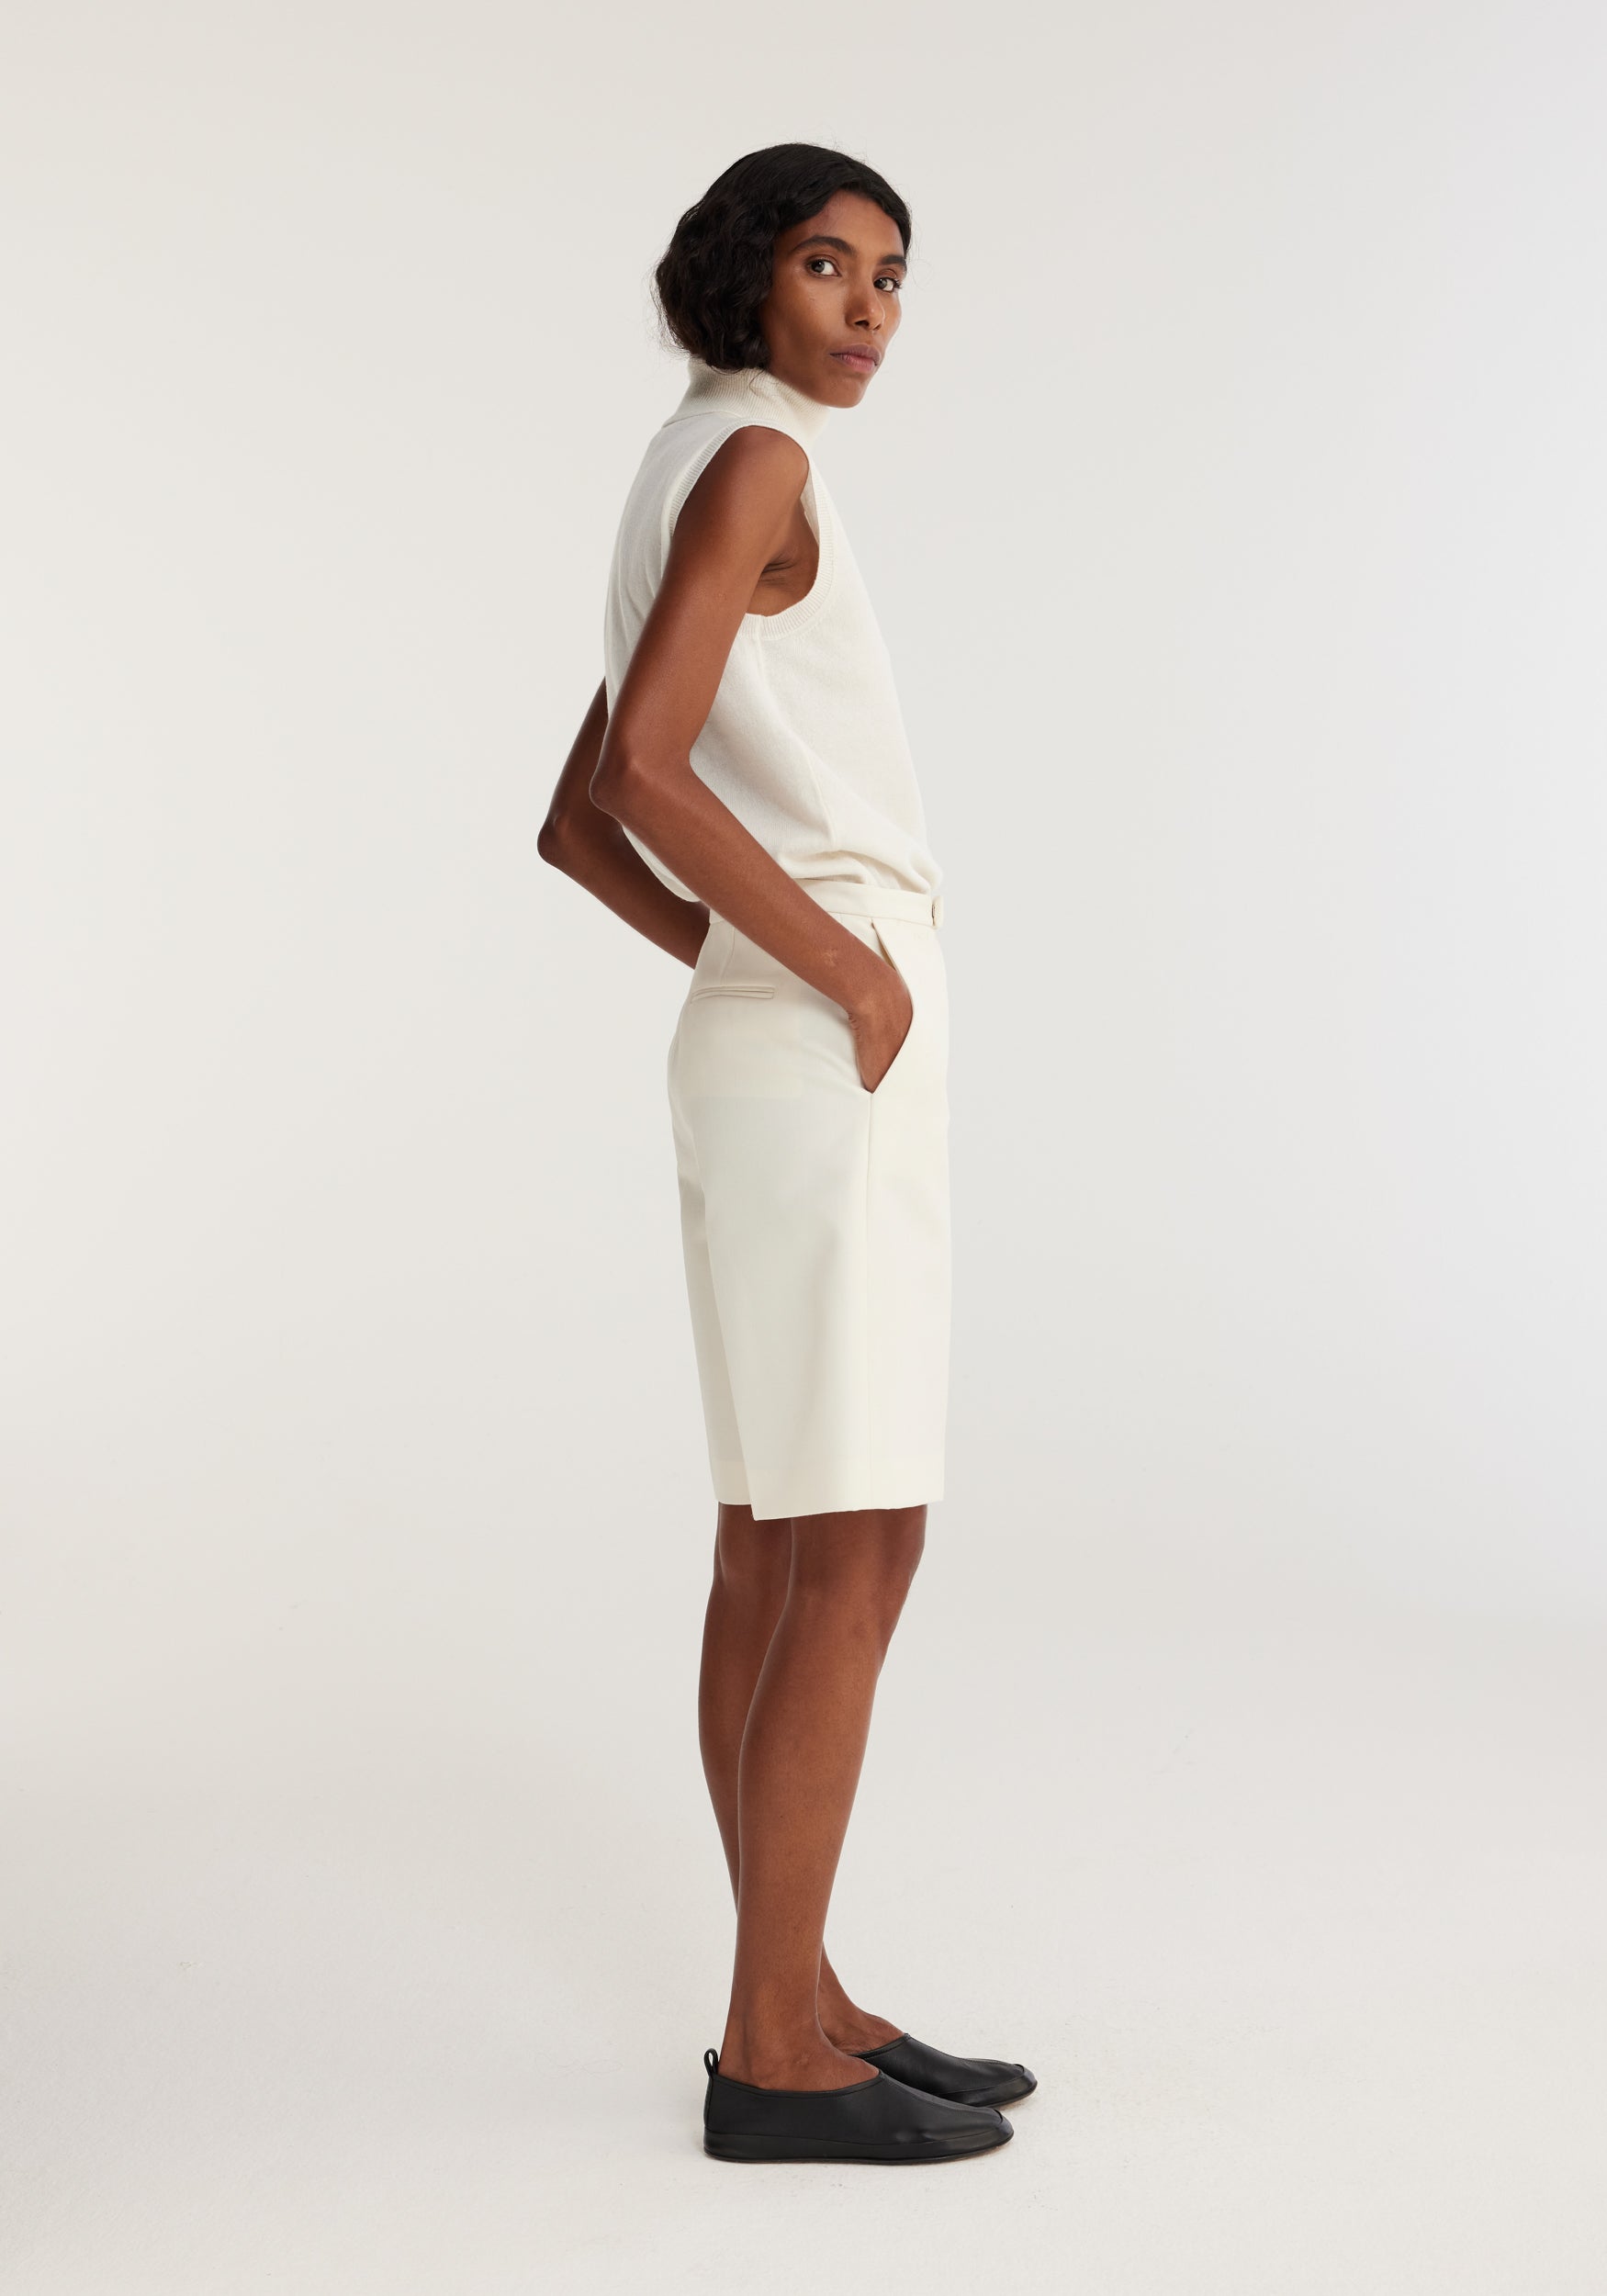 The Rohe Tailored Wool Shorts in Ivory available at The New Trend Australia